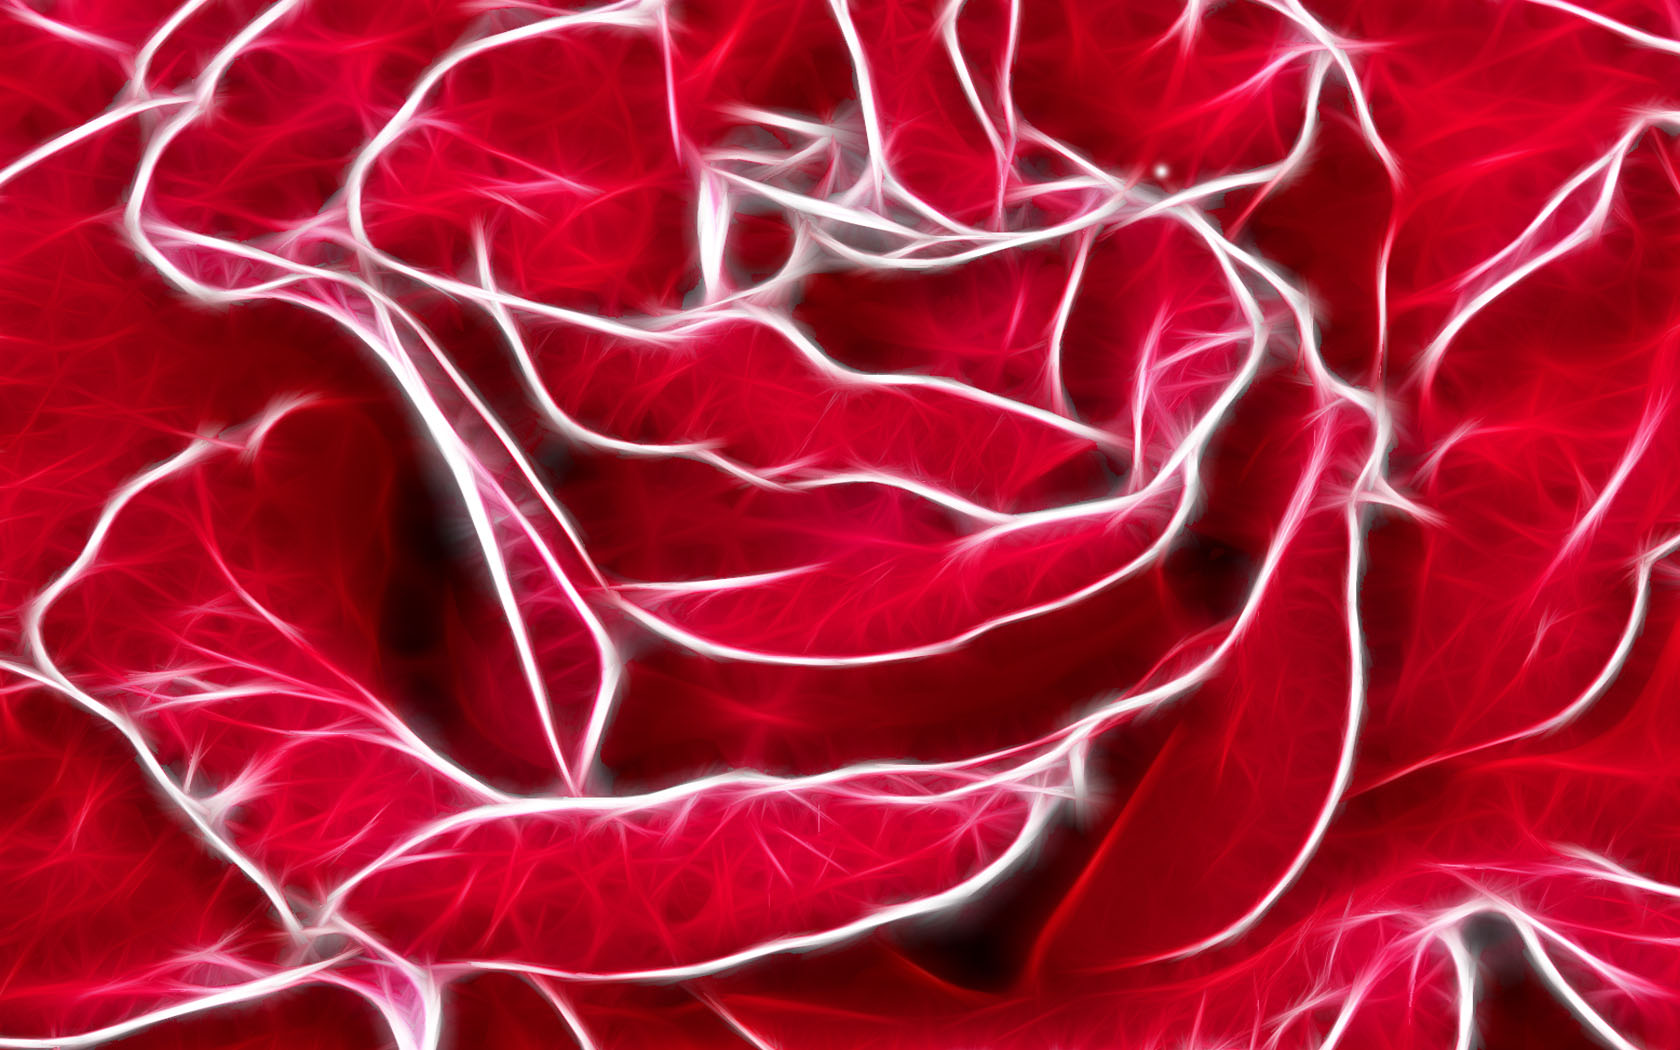 Colorful rose-shaped pattern with textured petals, created digitally.